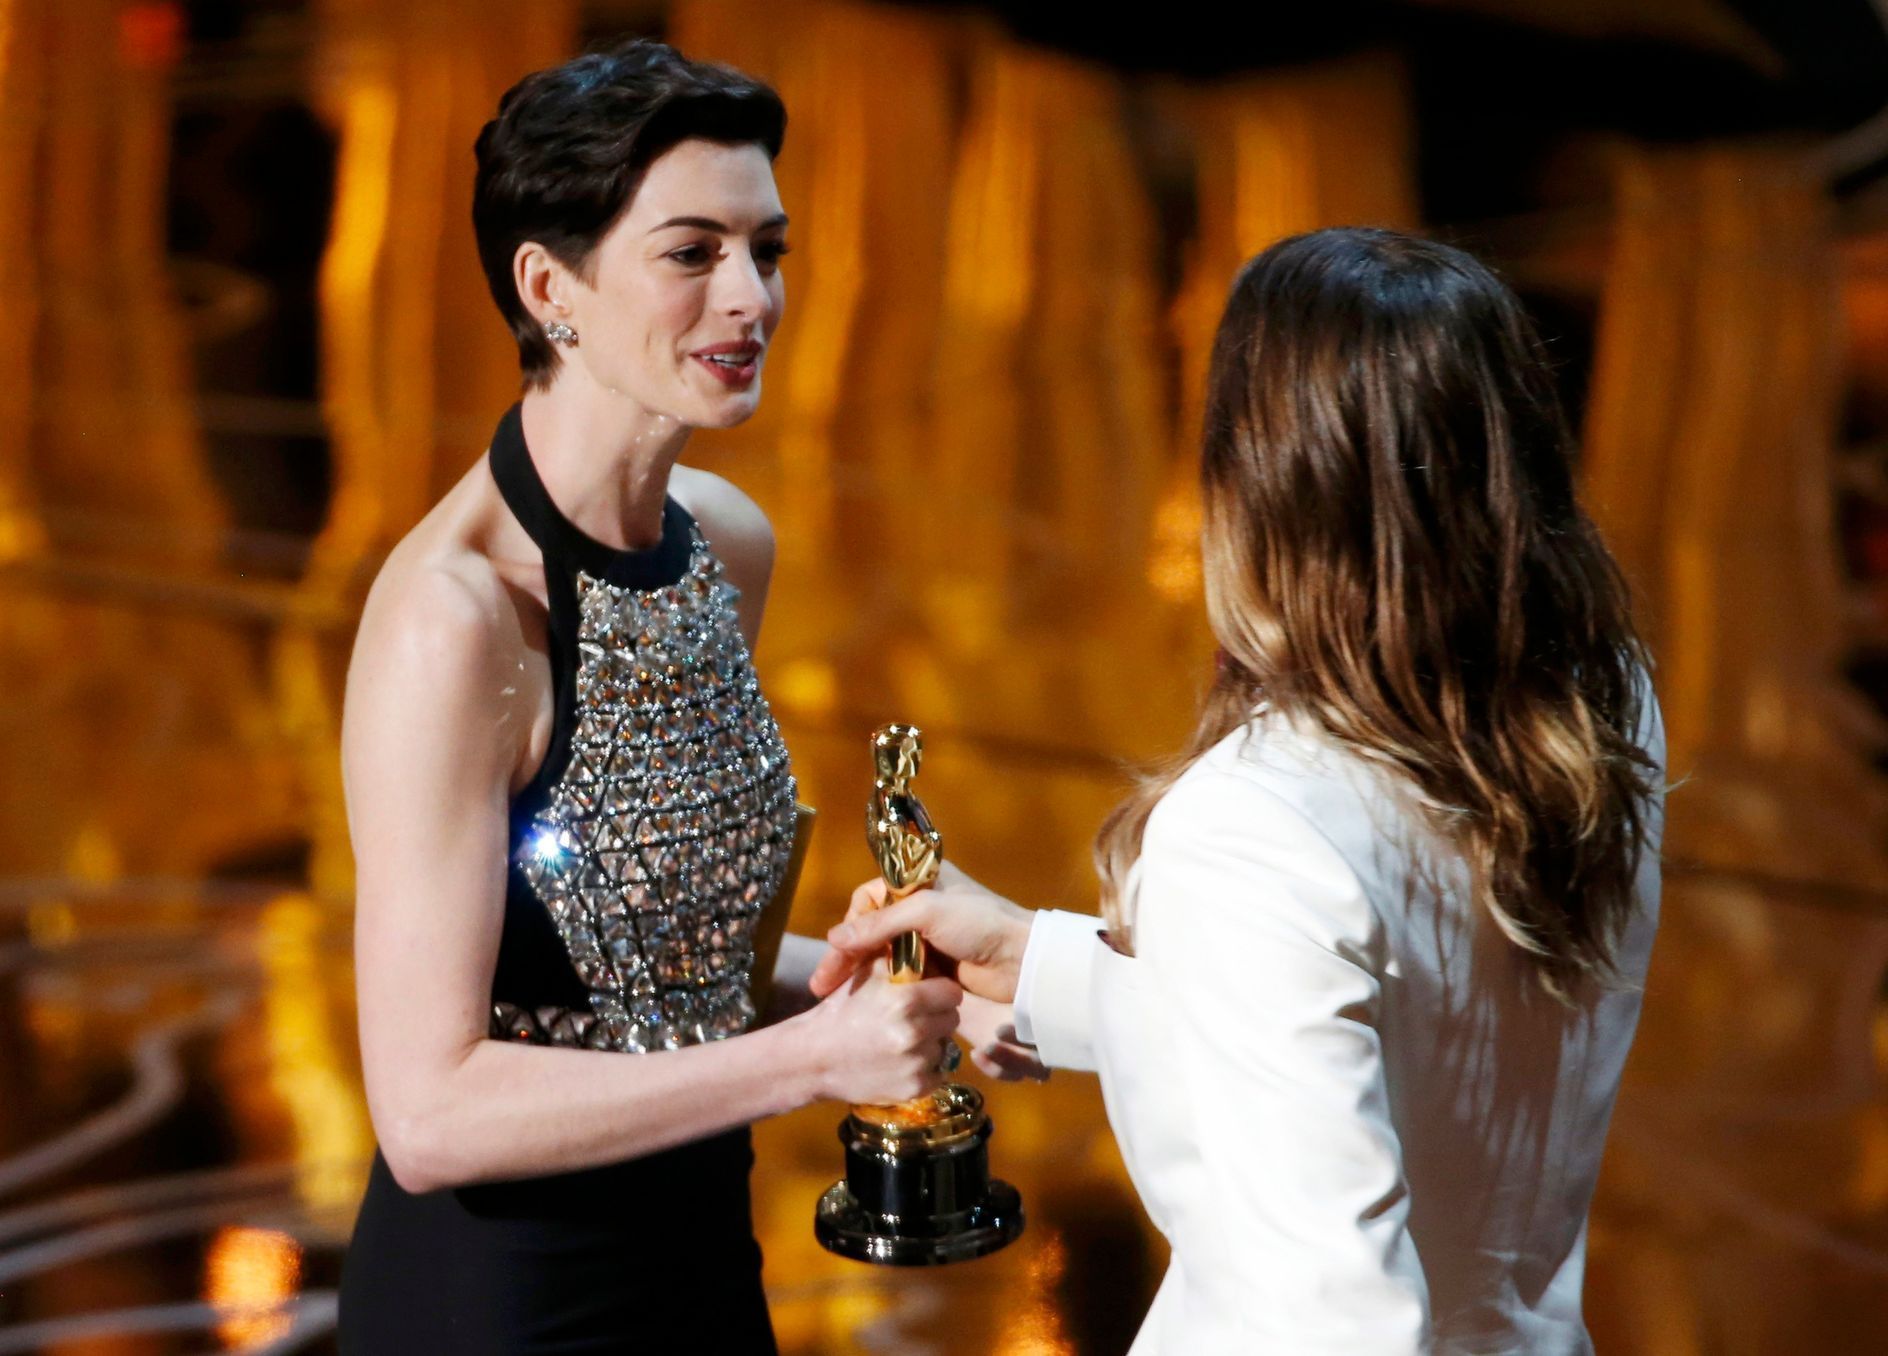 Hathaway presents the award to Leto, best supporting actor winner for his role in &quot;Dallas Buyers Club&quot; at the 86th Academy Awards in Hollywood